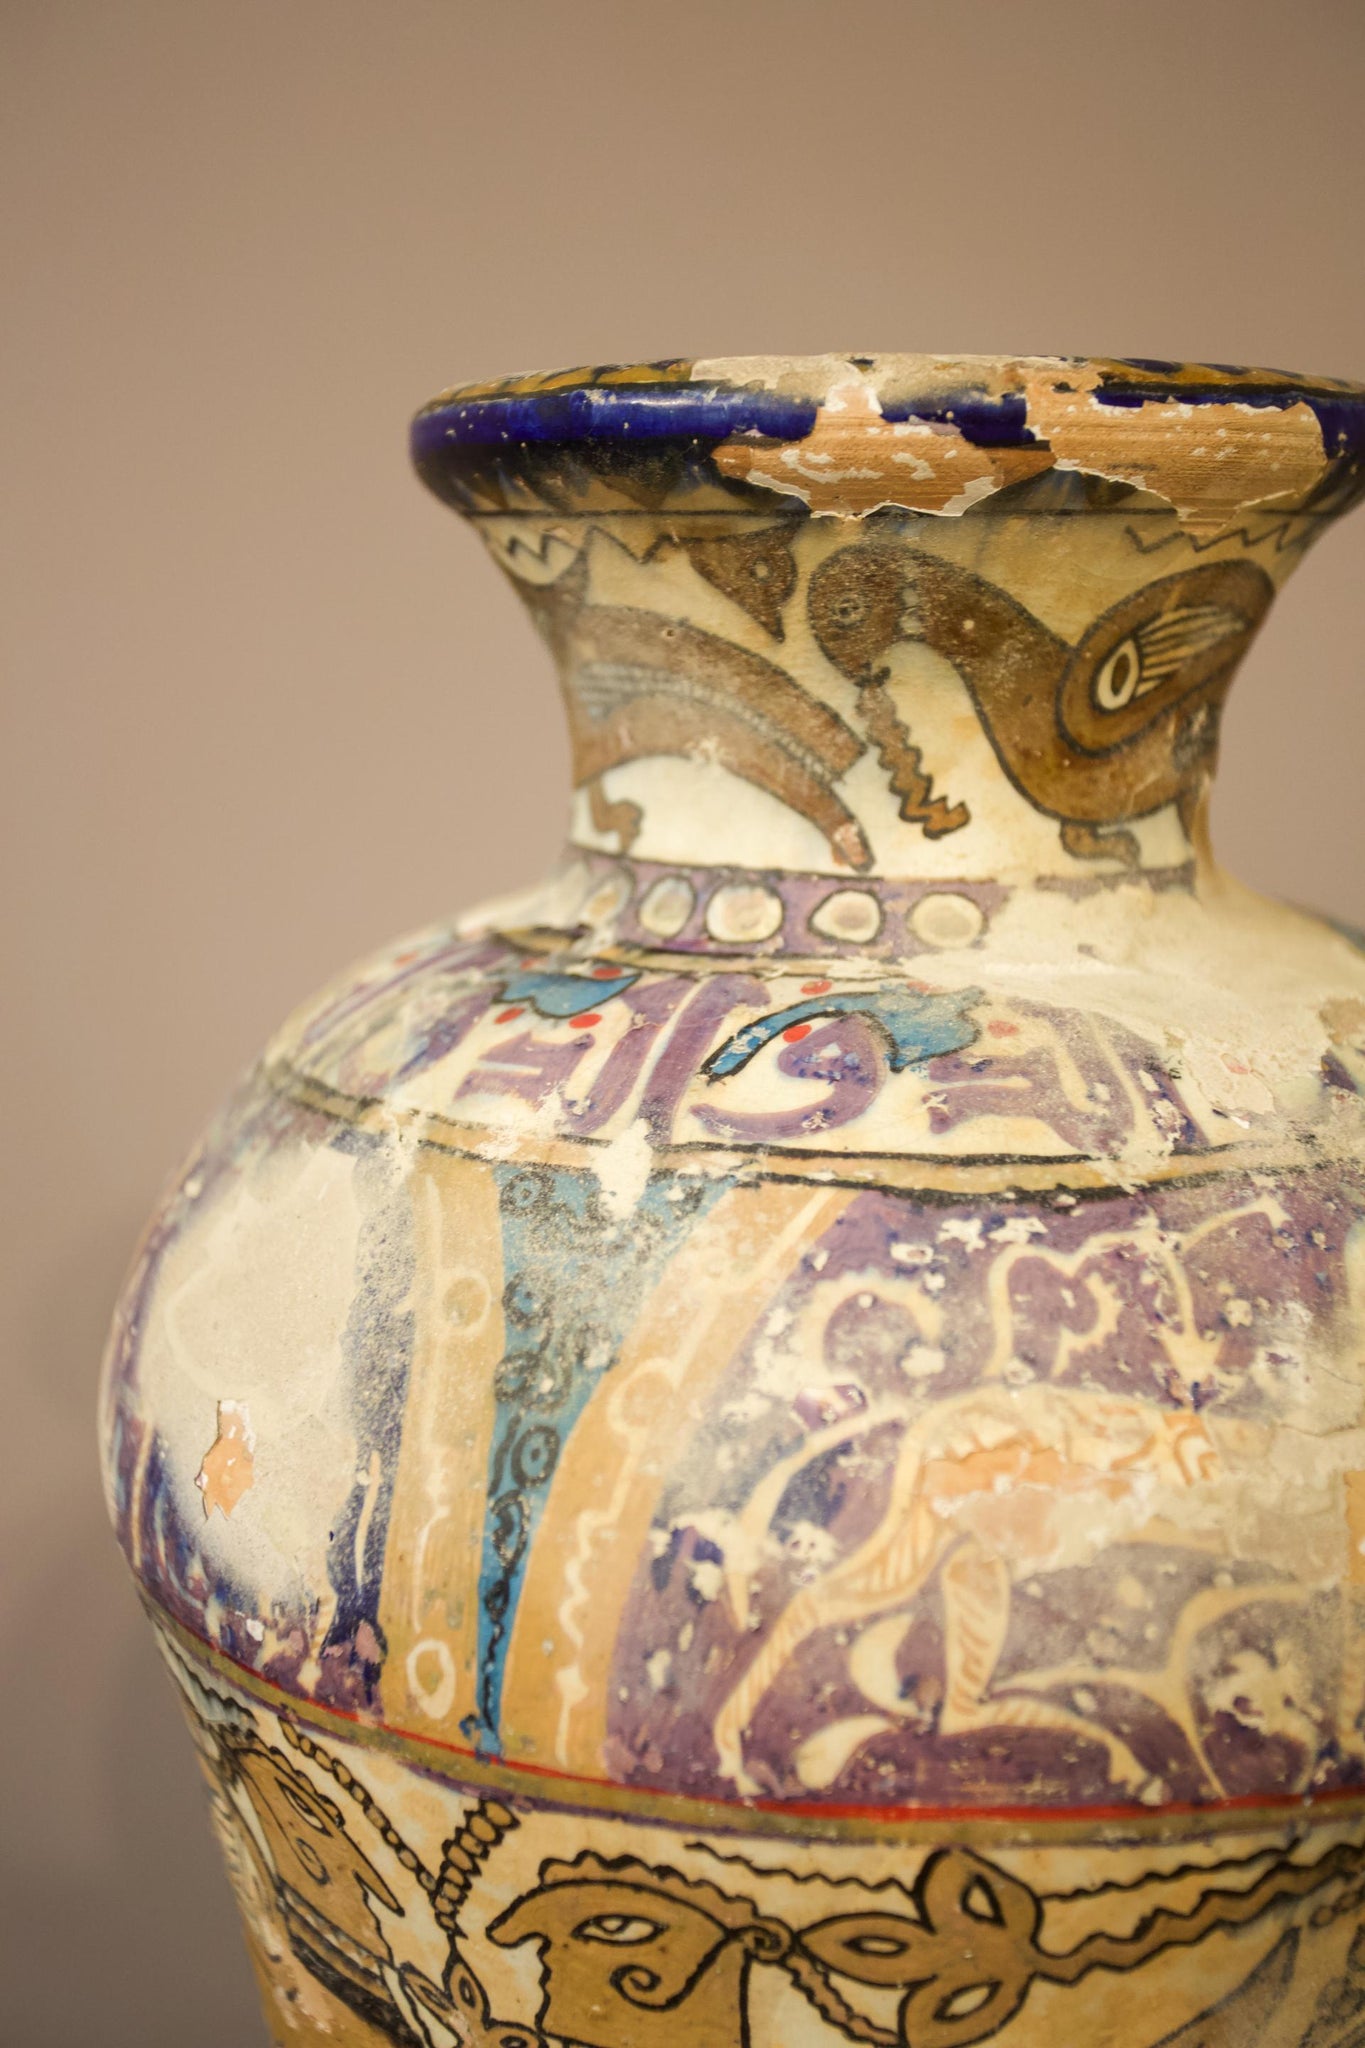 Large 14th century Persian pottery funerary vase